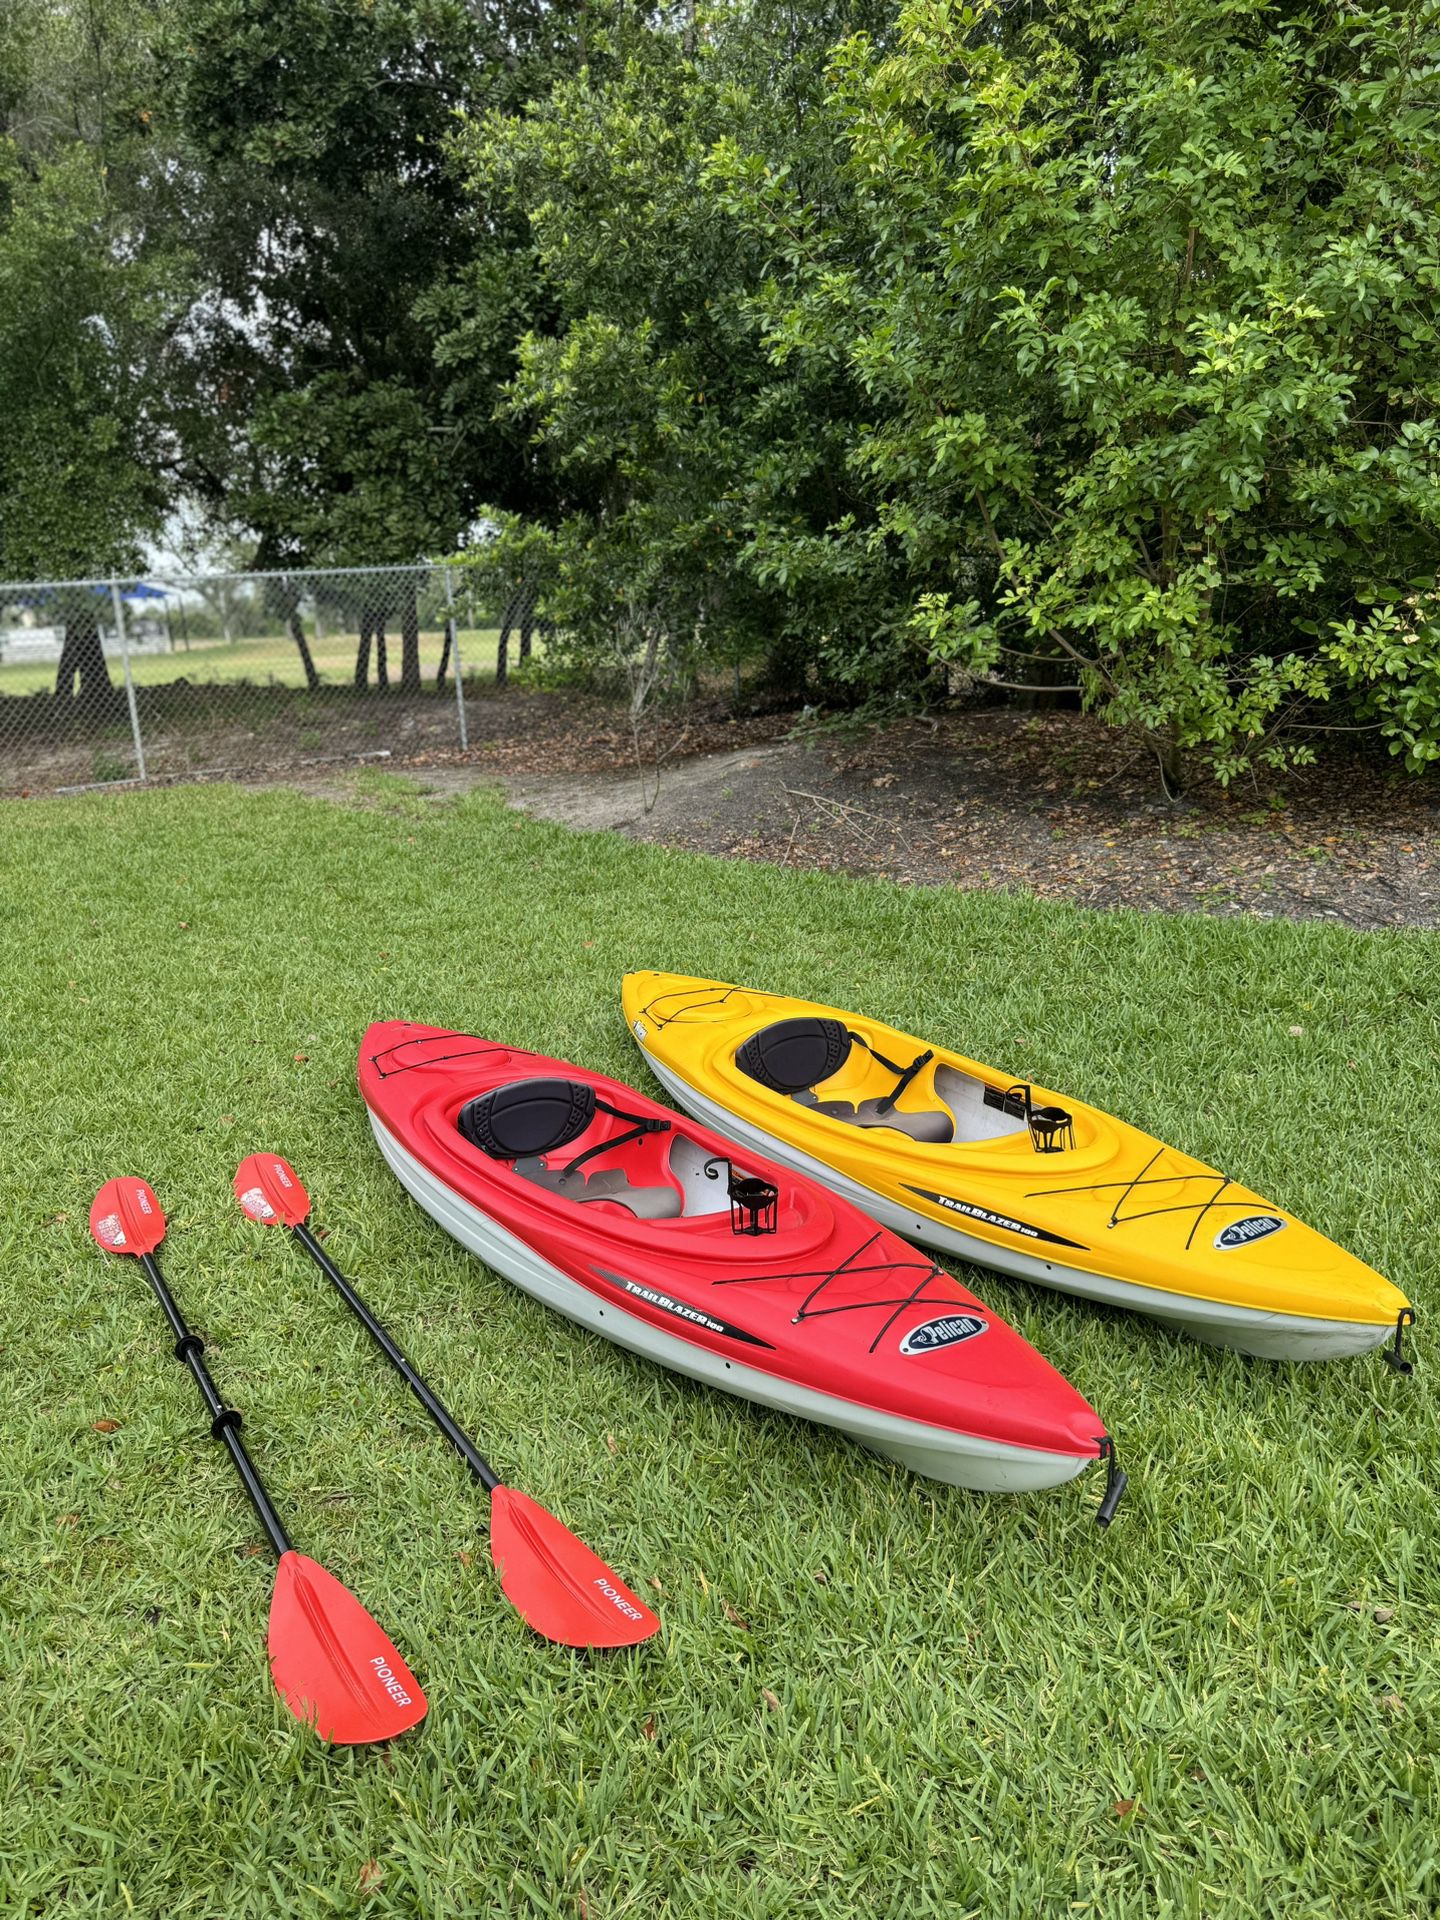 Hers and His Kayaks